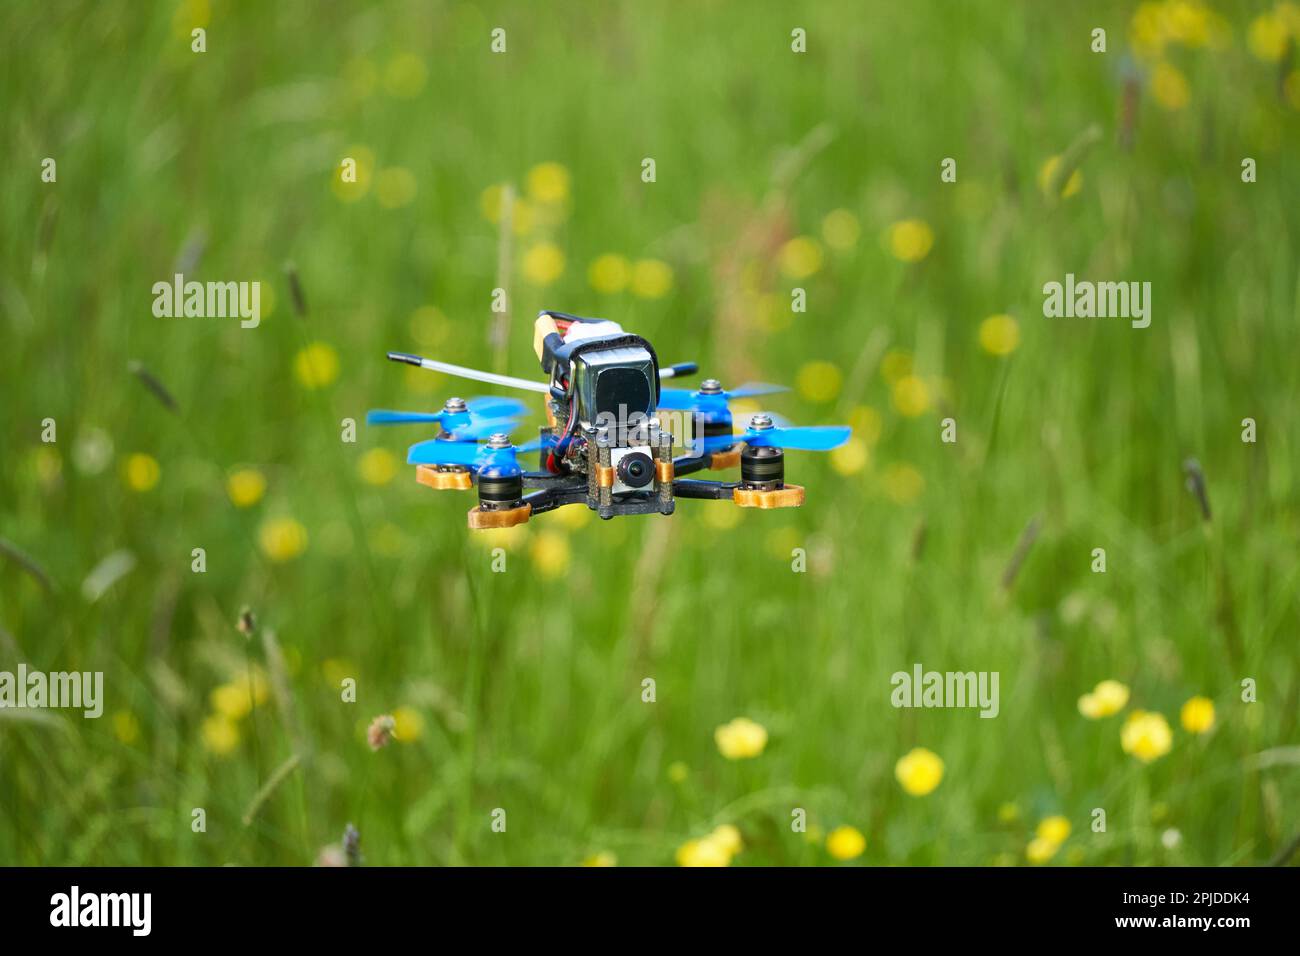 Small racing drone floats calmly over a beautiful flower meadow. View diagonally from the front. Depth of field. Stock Photo